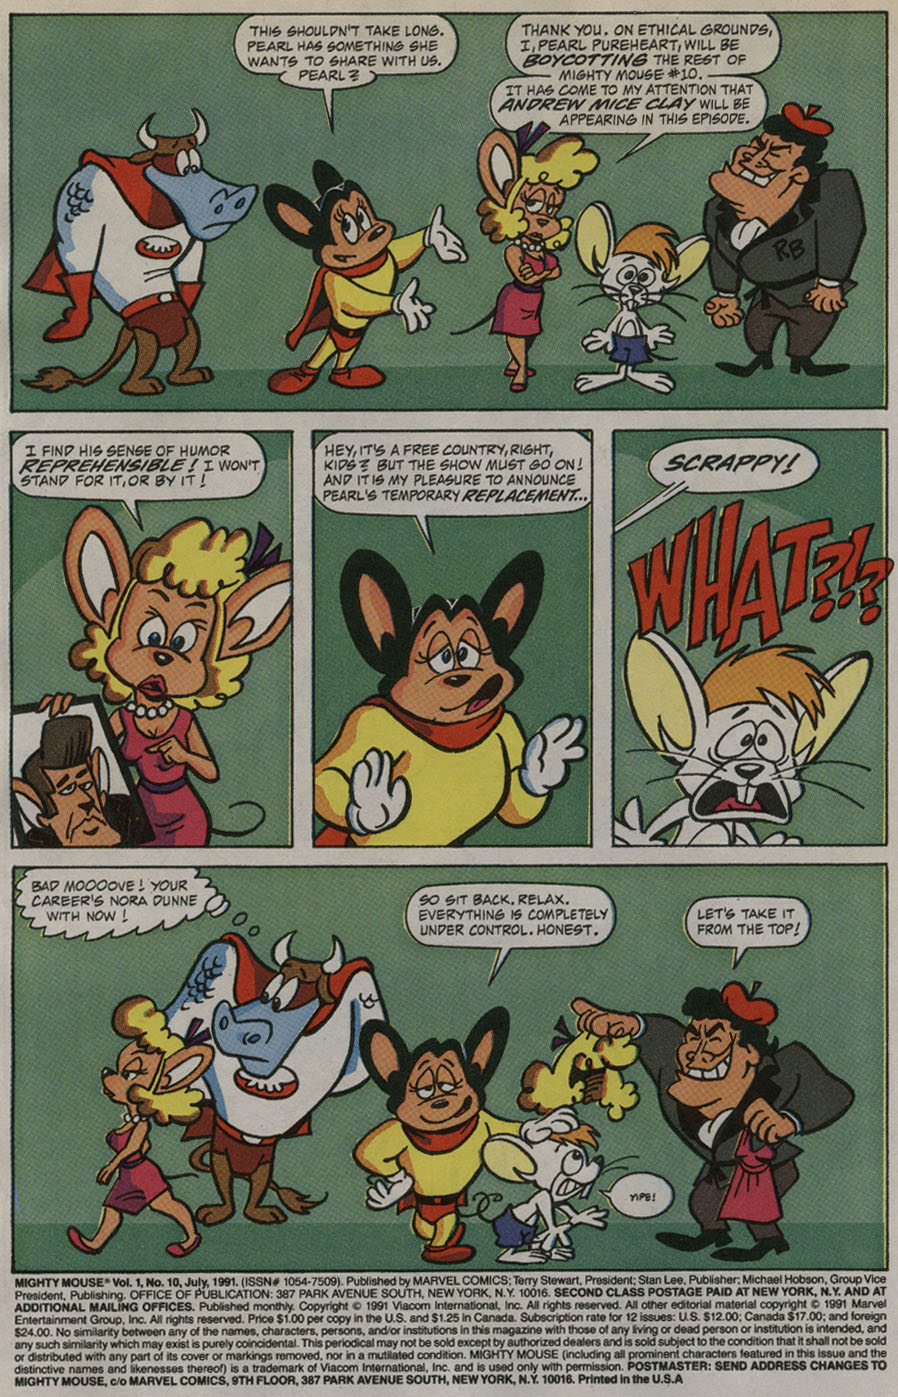 Mighty Mouse Issue 10 | Read Mighty Mouse Issue 10 comic online in high  quality. Read Full Comic online for free - Read comics online in high  quality .| READ COMIC ONLINE